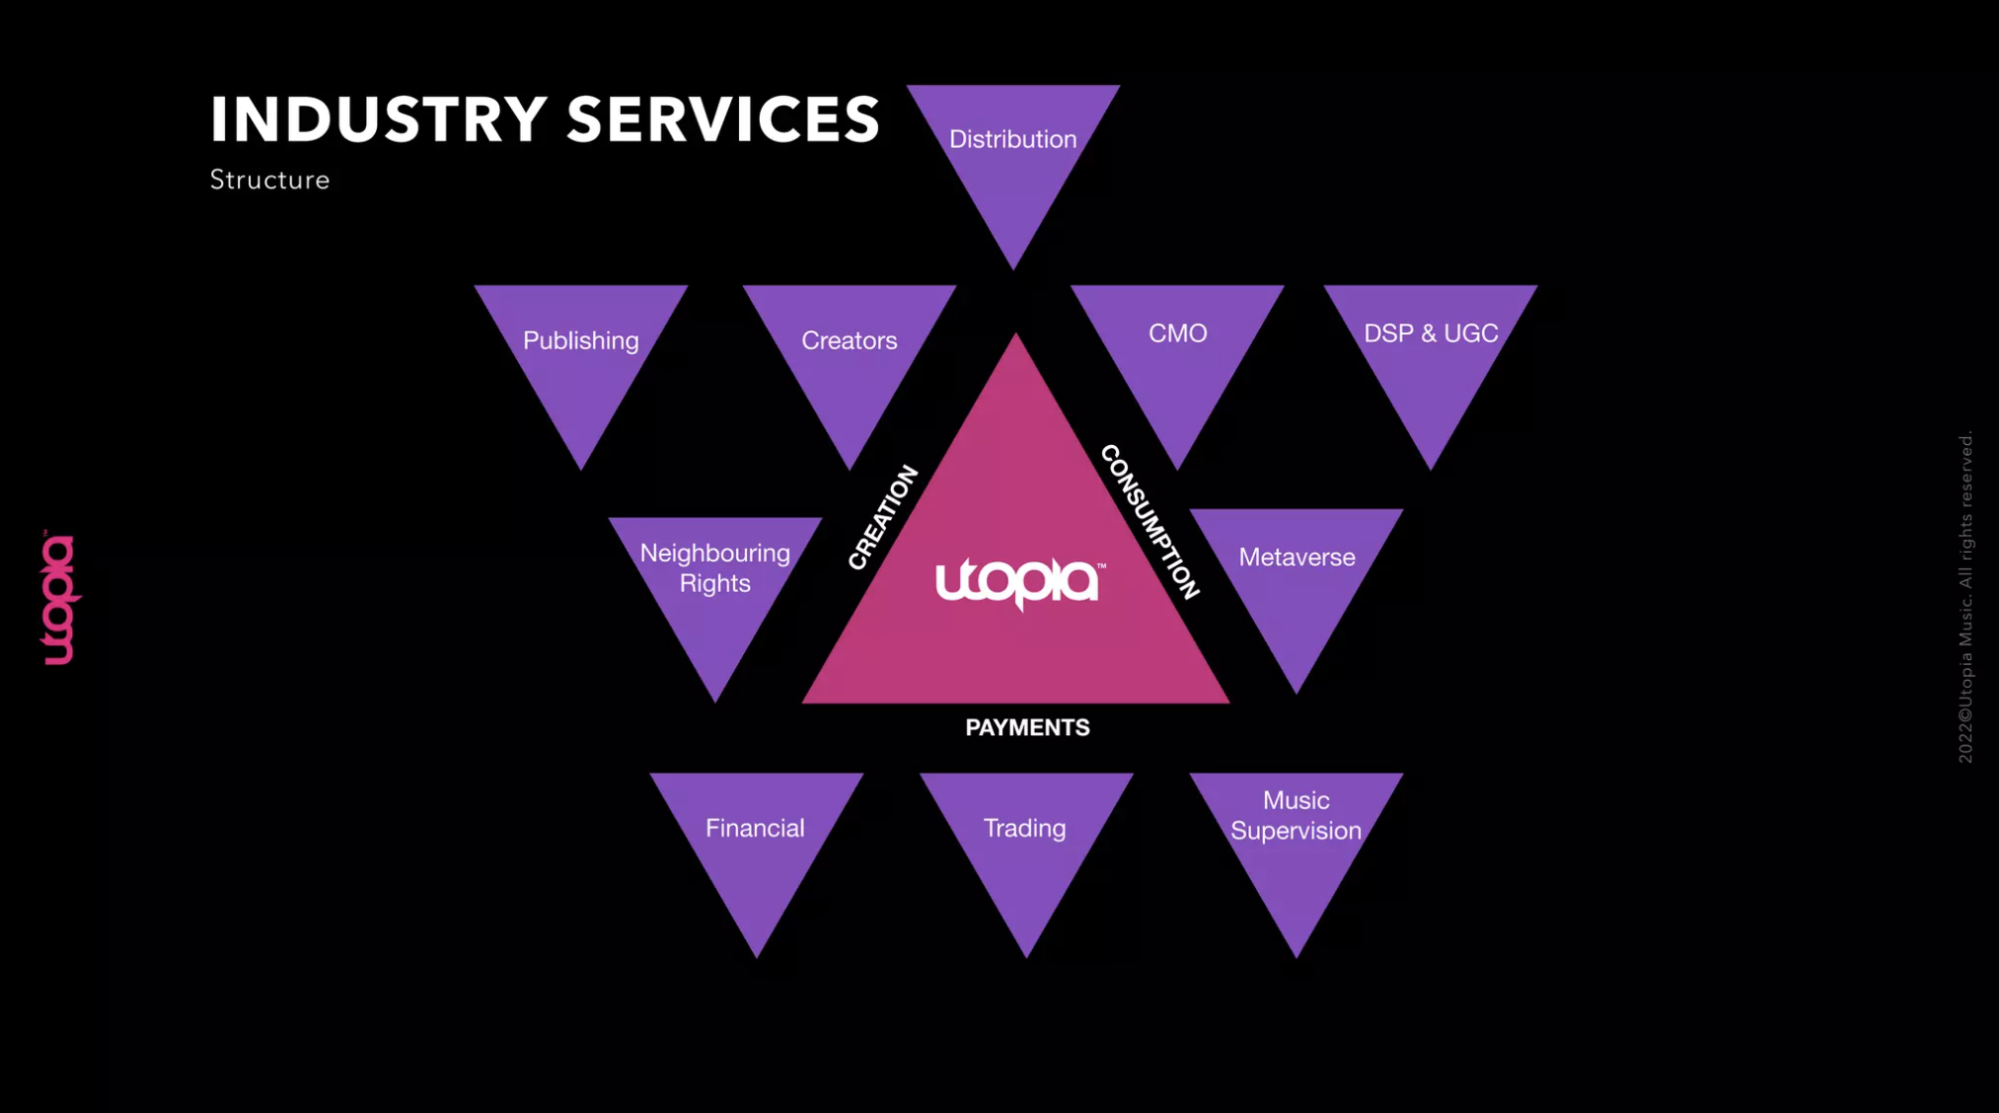 Scheme of the structure of the industry services